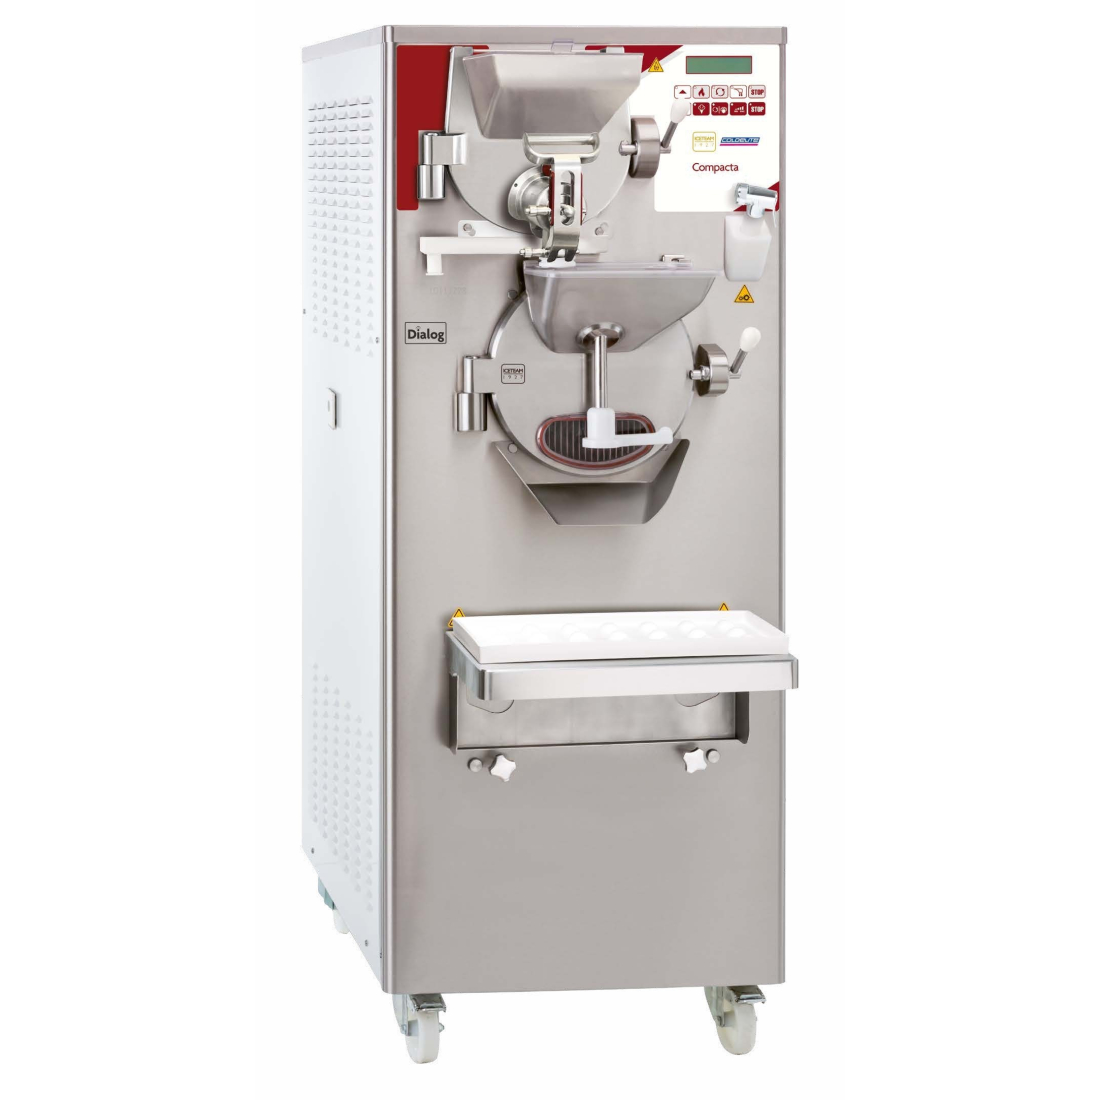 ICETEAM COMPACTA 10 SILVER VARIO COMBINED BATCH FREEZER|mkayn|مكاين